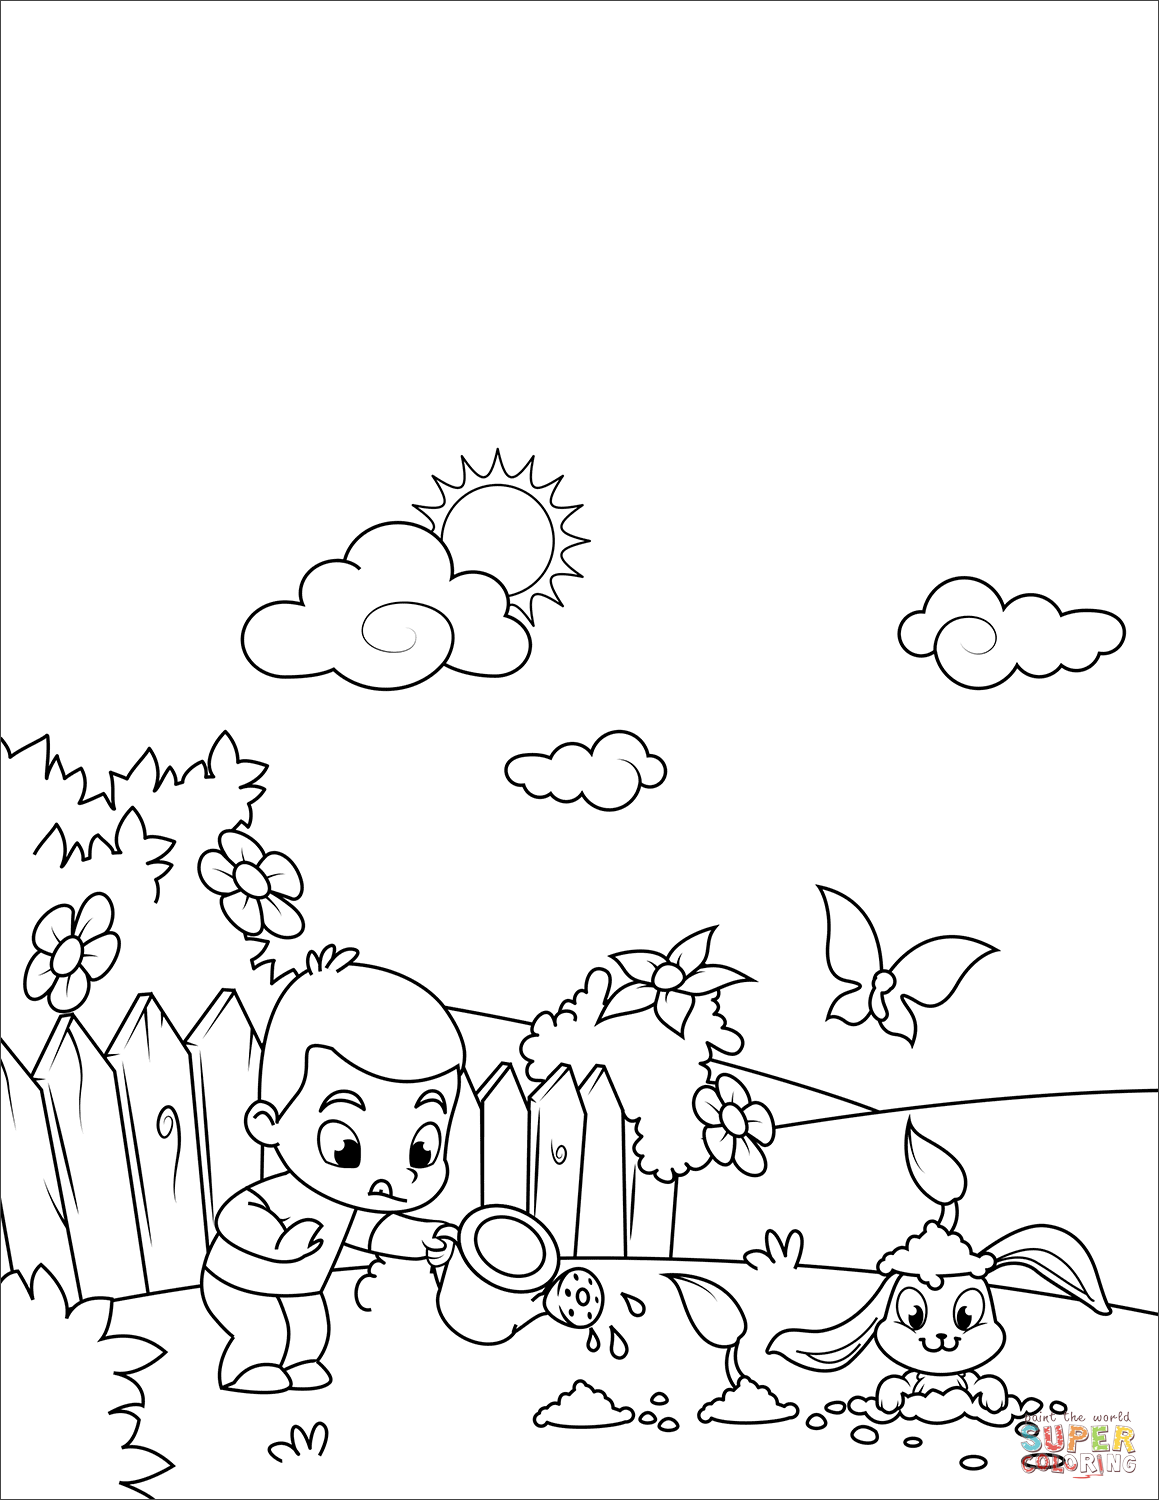 Boy Watering Flowers and Cute Rabbit Digging Through Them coloring page |  Free Printable Coloring Pages